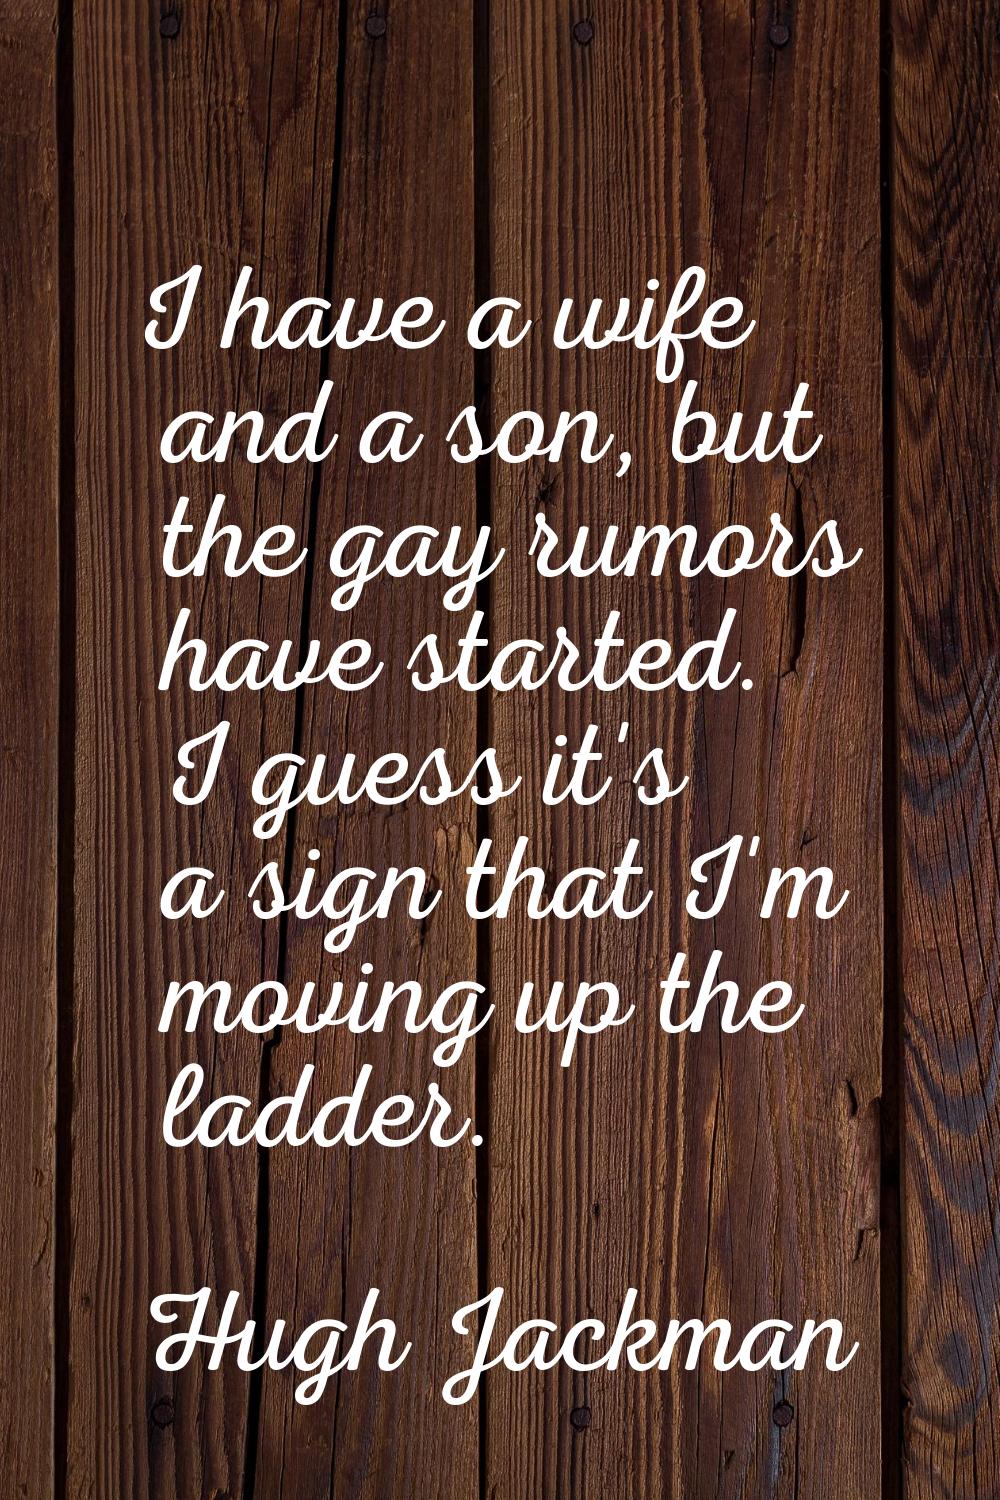 I have a wife and a son, but the gay rumors have started. I guess it's a sign that I'm moving up th